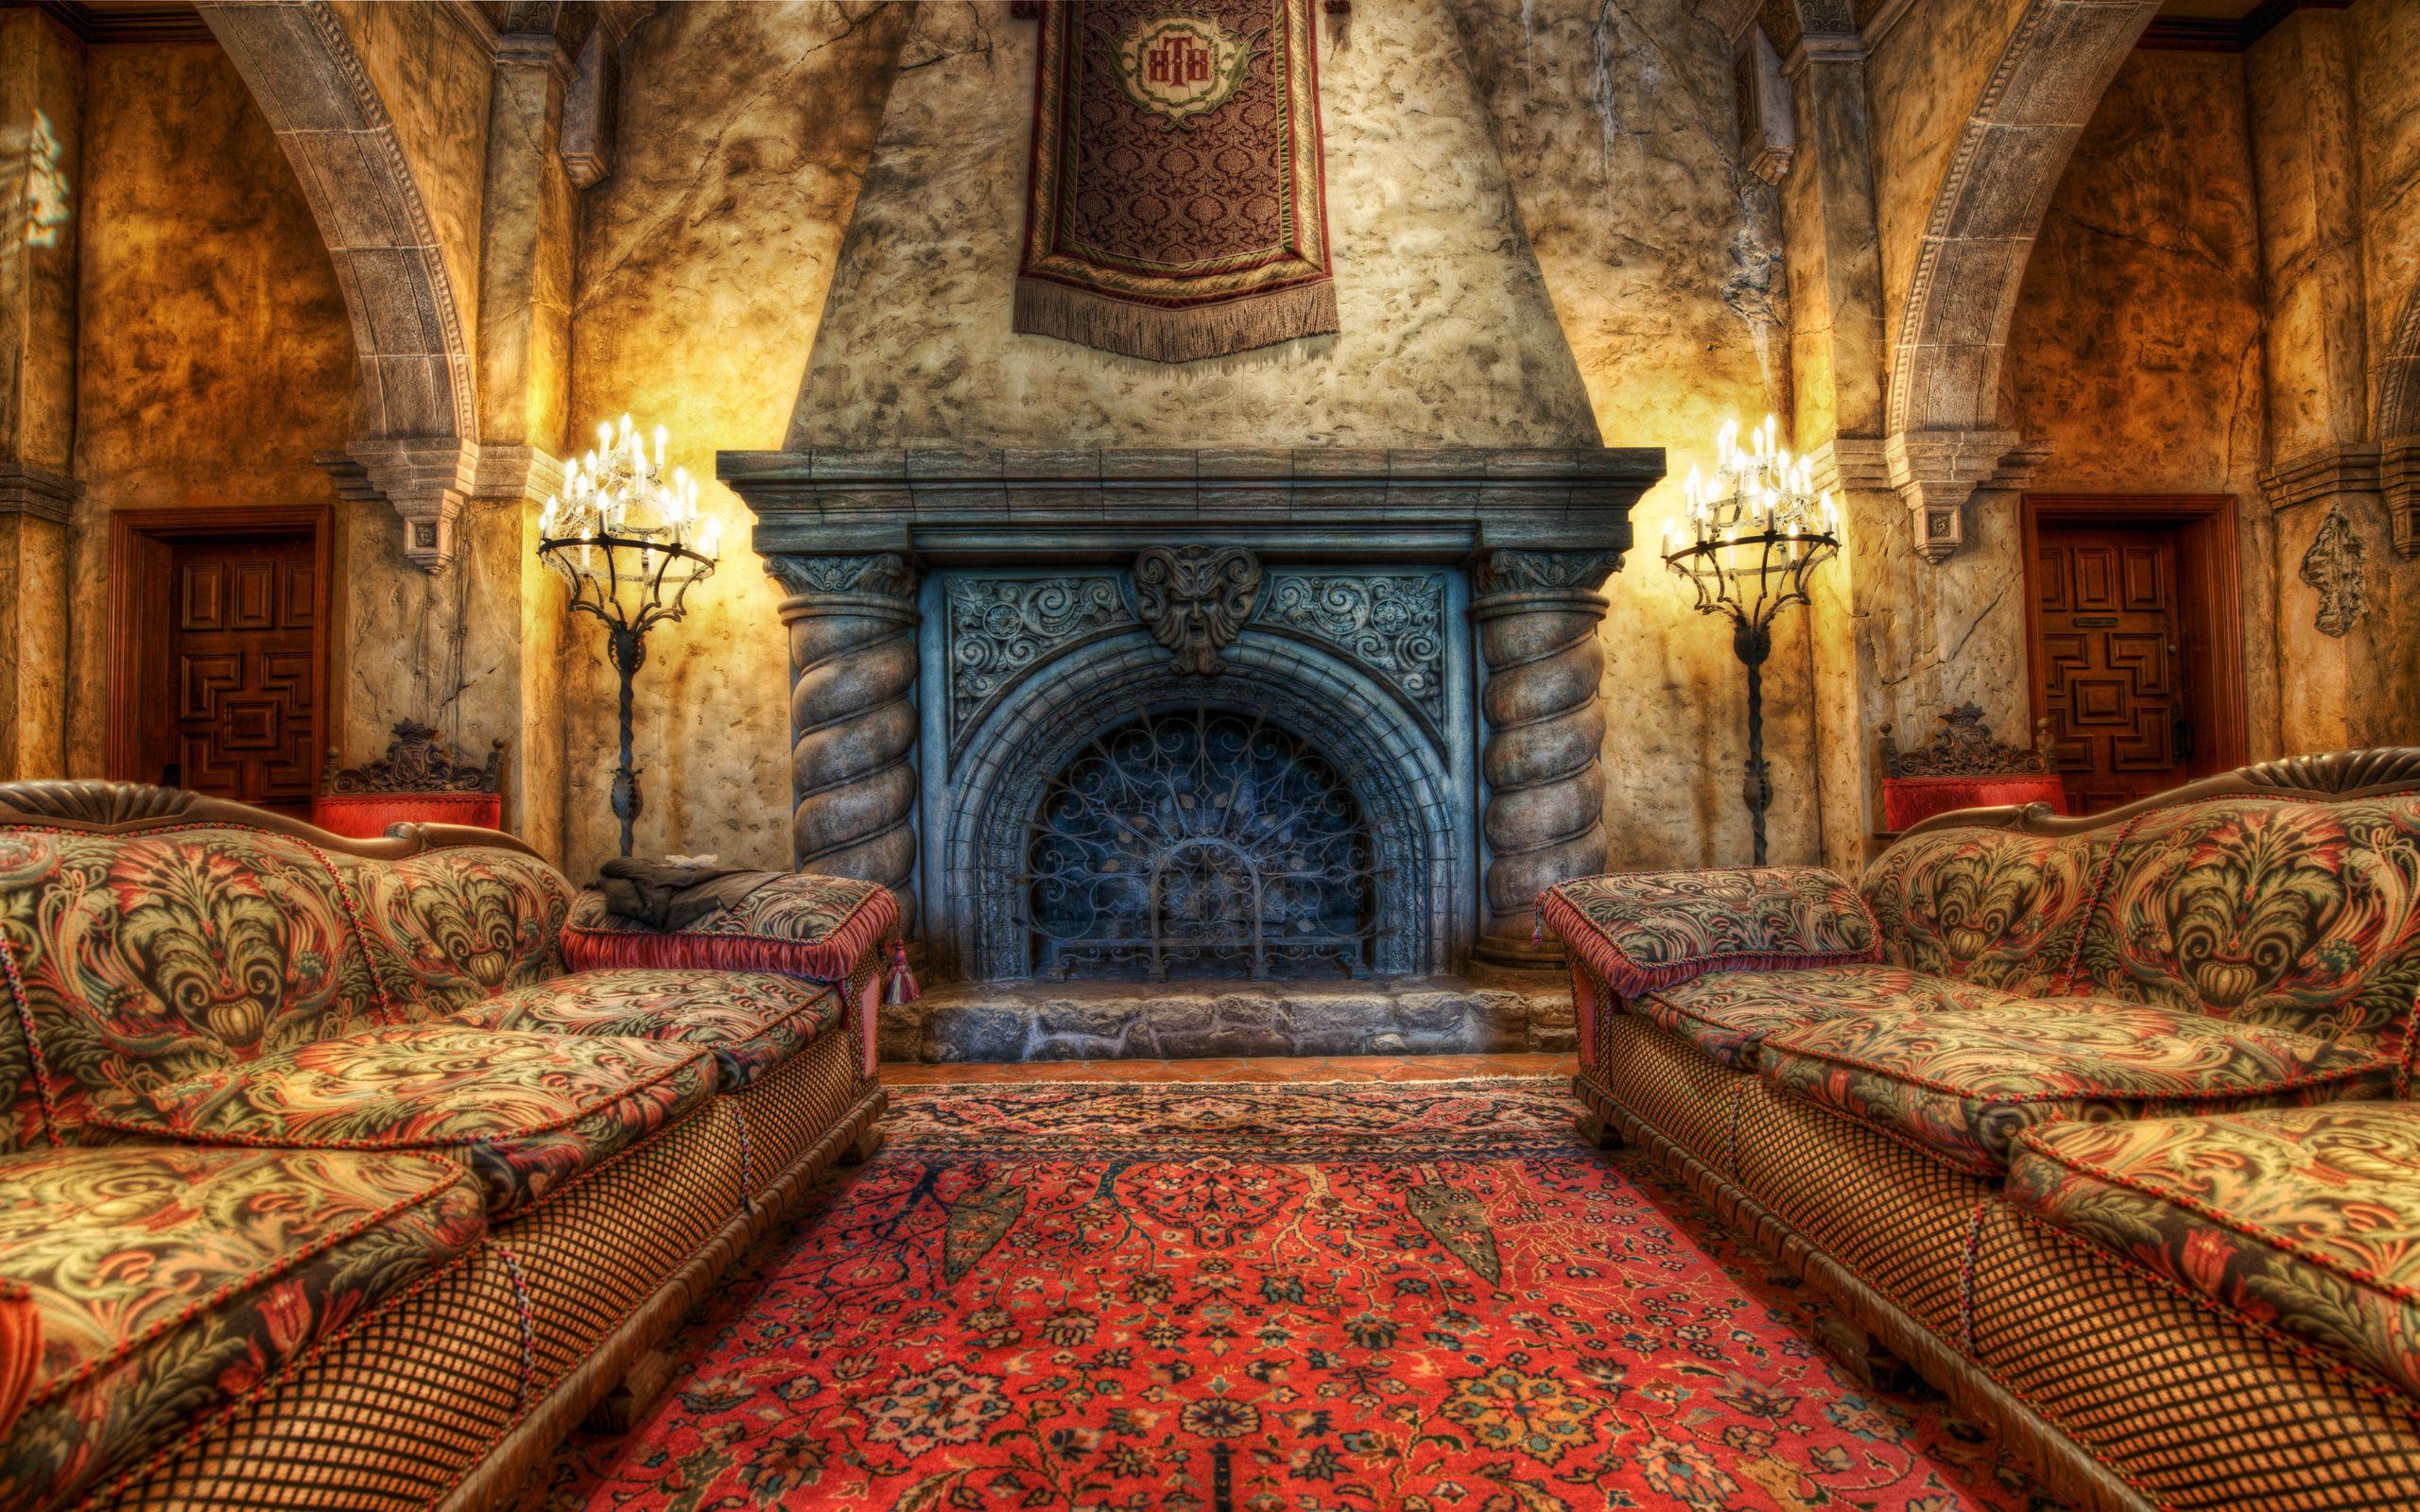 The Fireplace in the Tower of Terror widescreen wallpaper. Wide